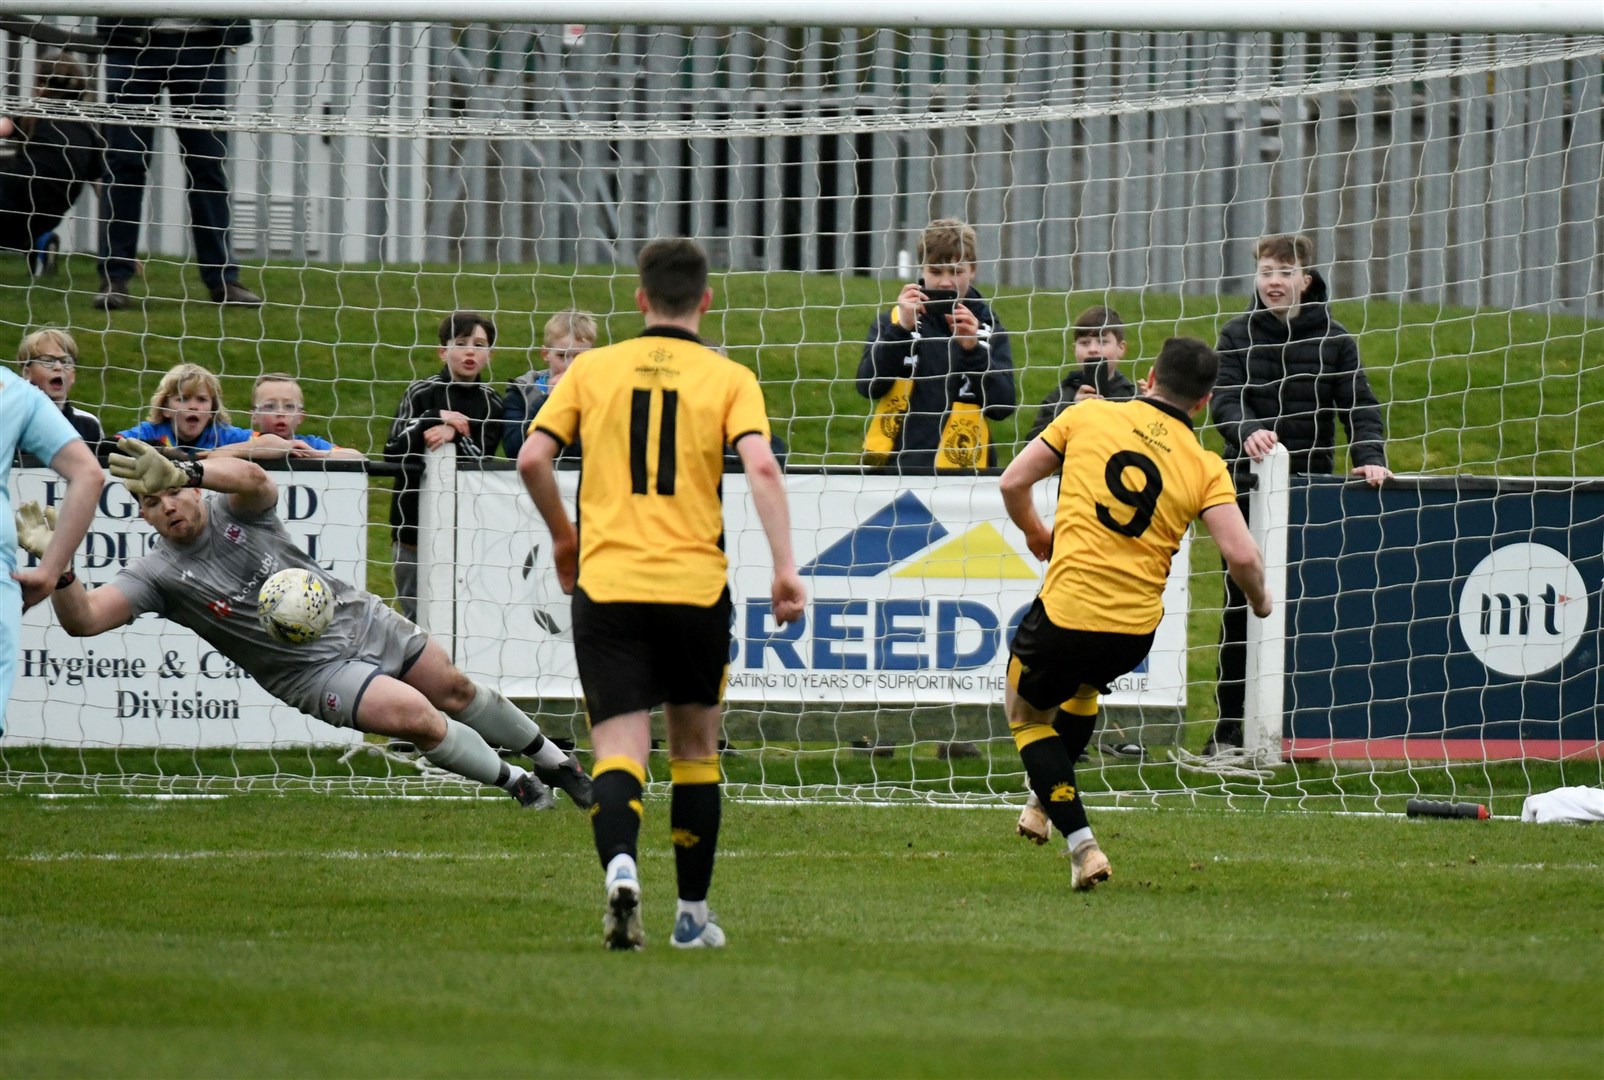 Conor Gethins scoring his 200th goal. Picture: James Mackenzie.